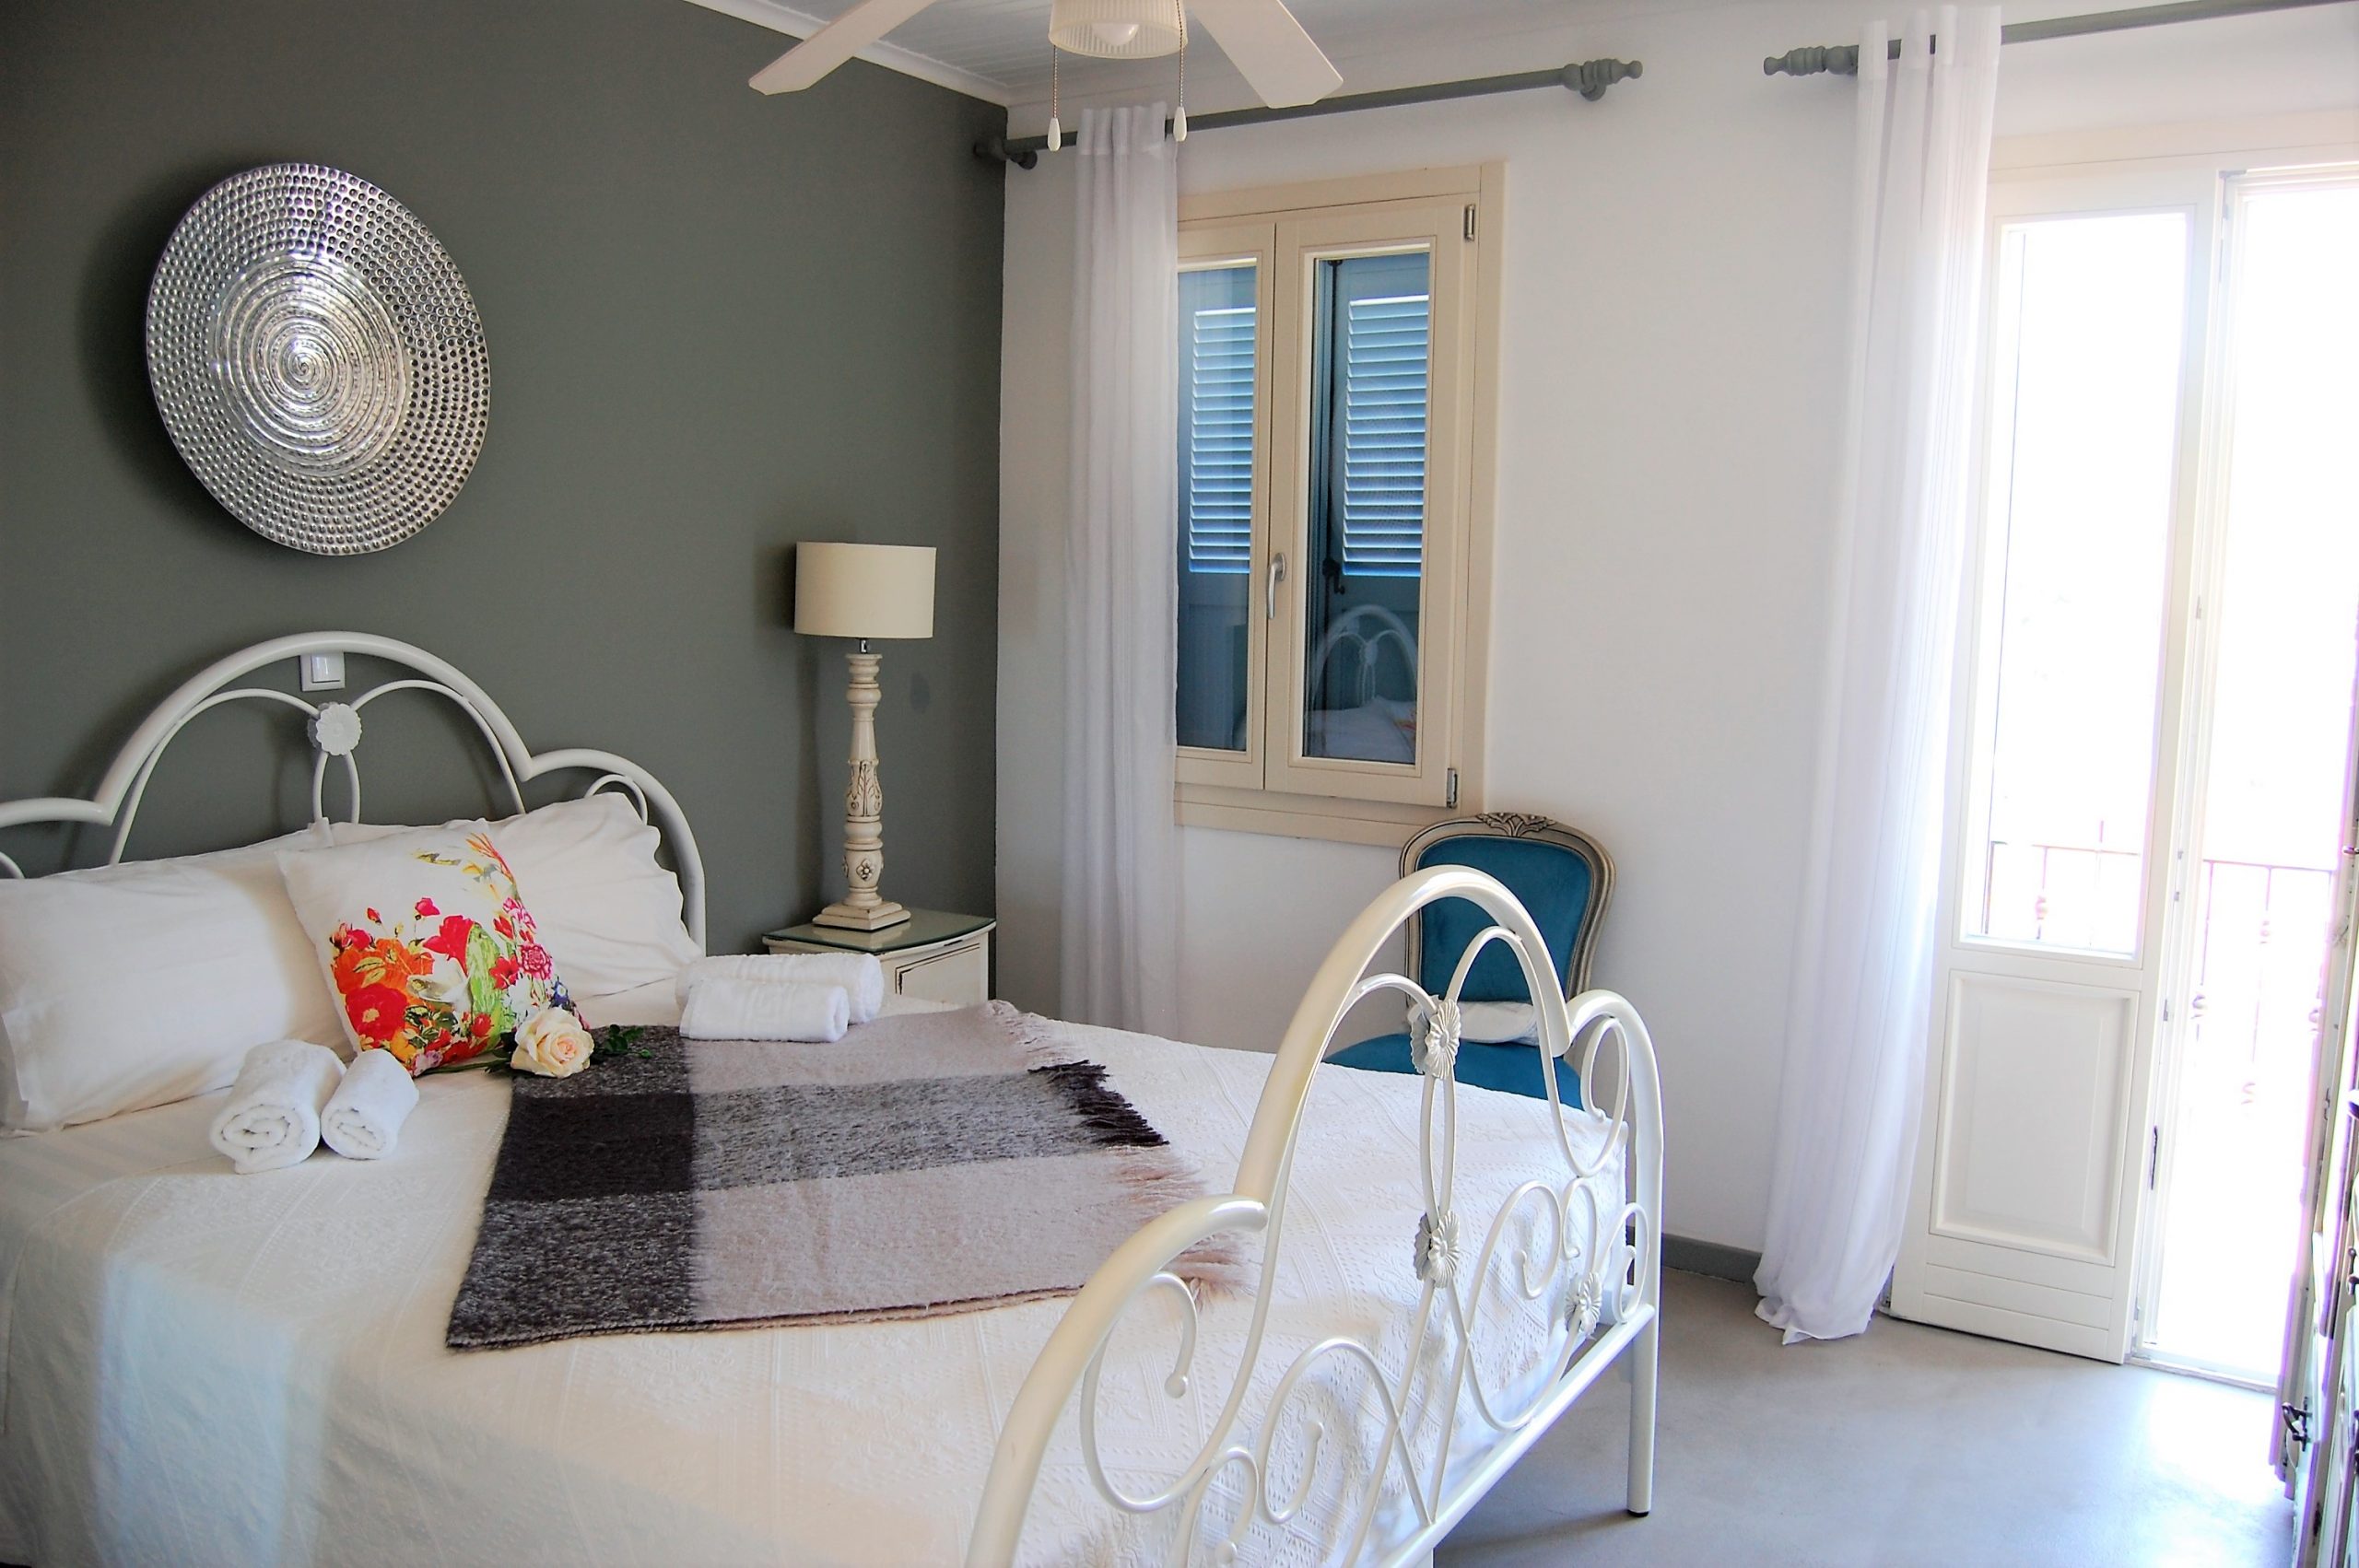 Bedroom of Bay View house for rent in Vathi